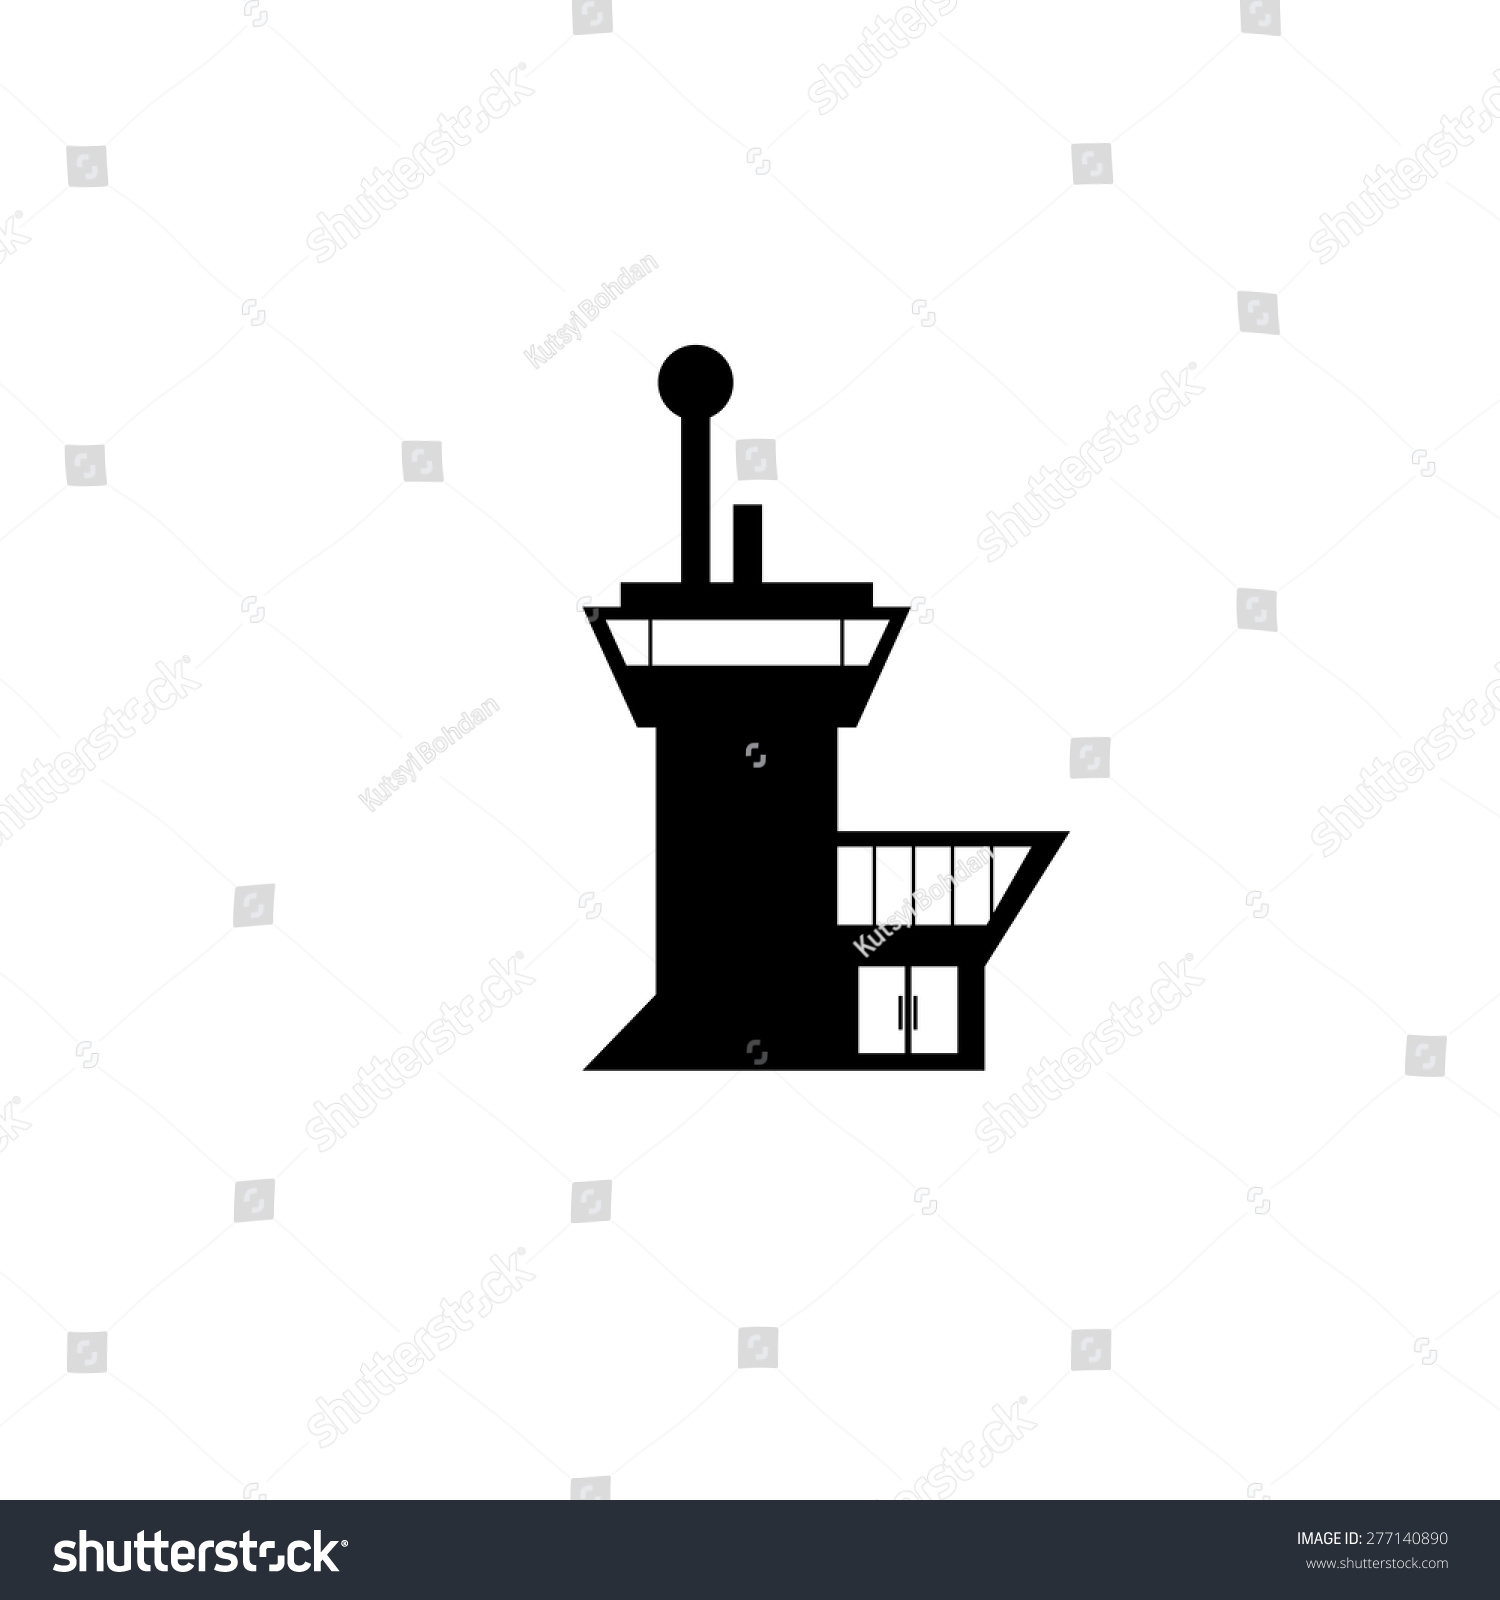 airport tower clipart - photo #36